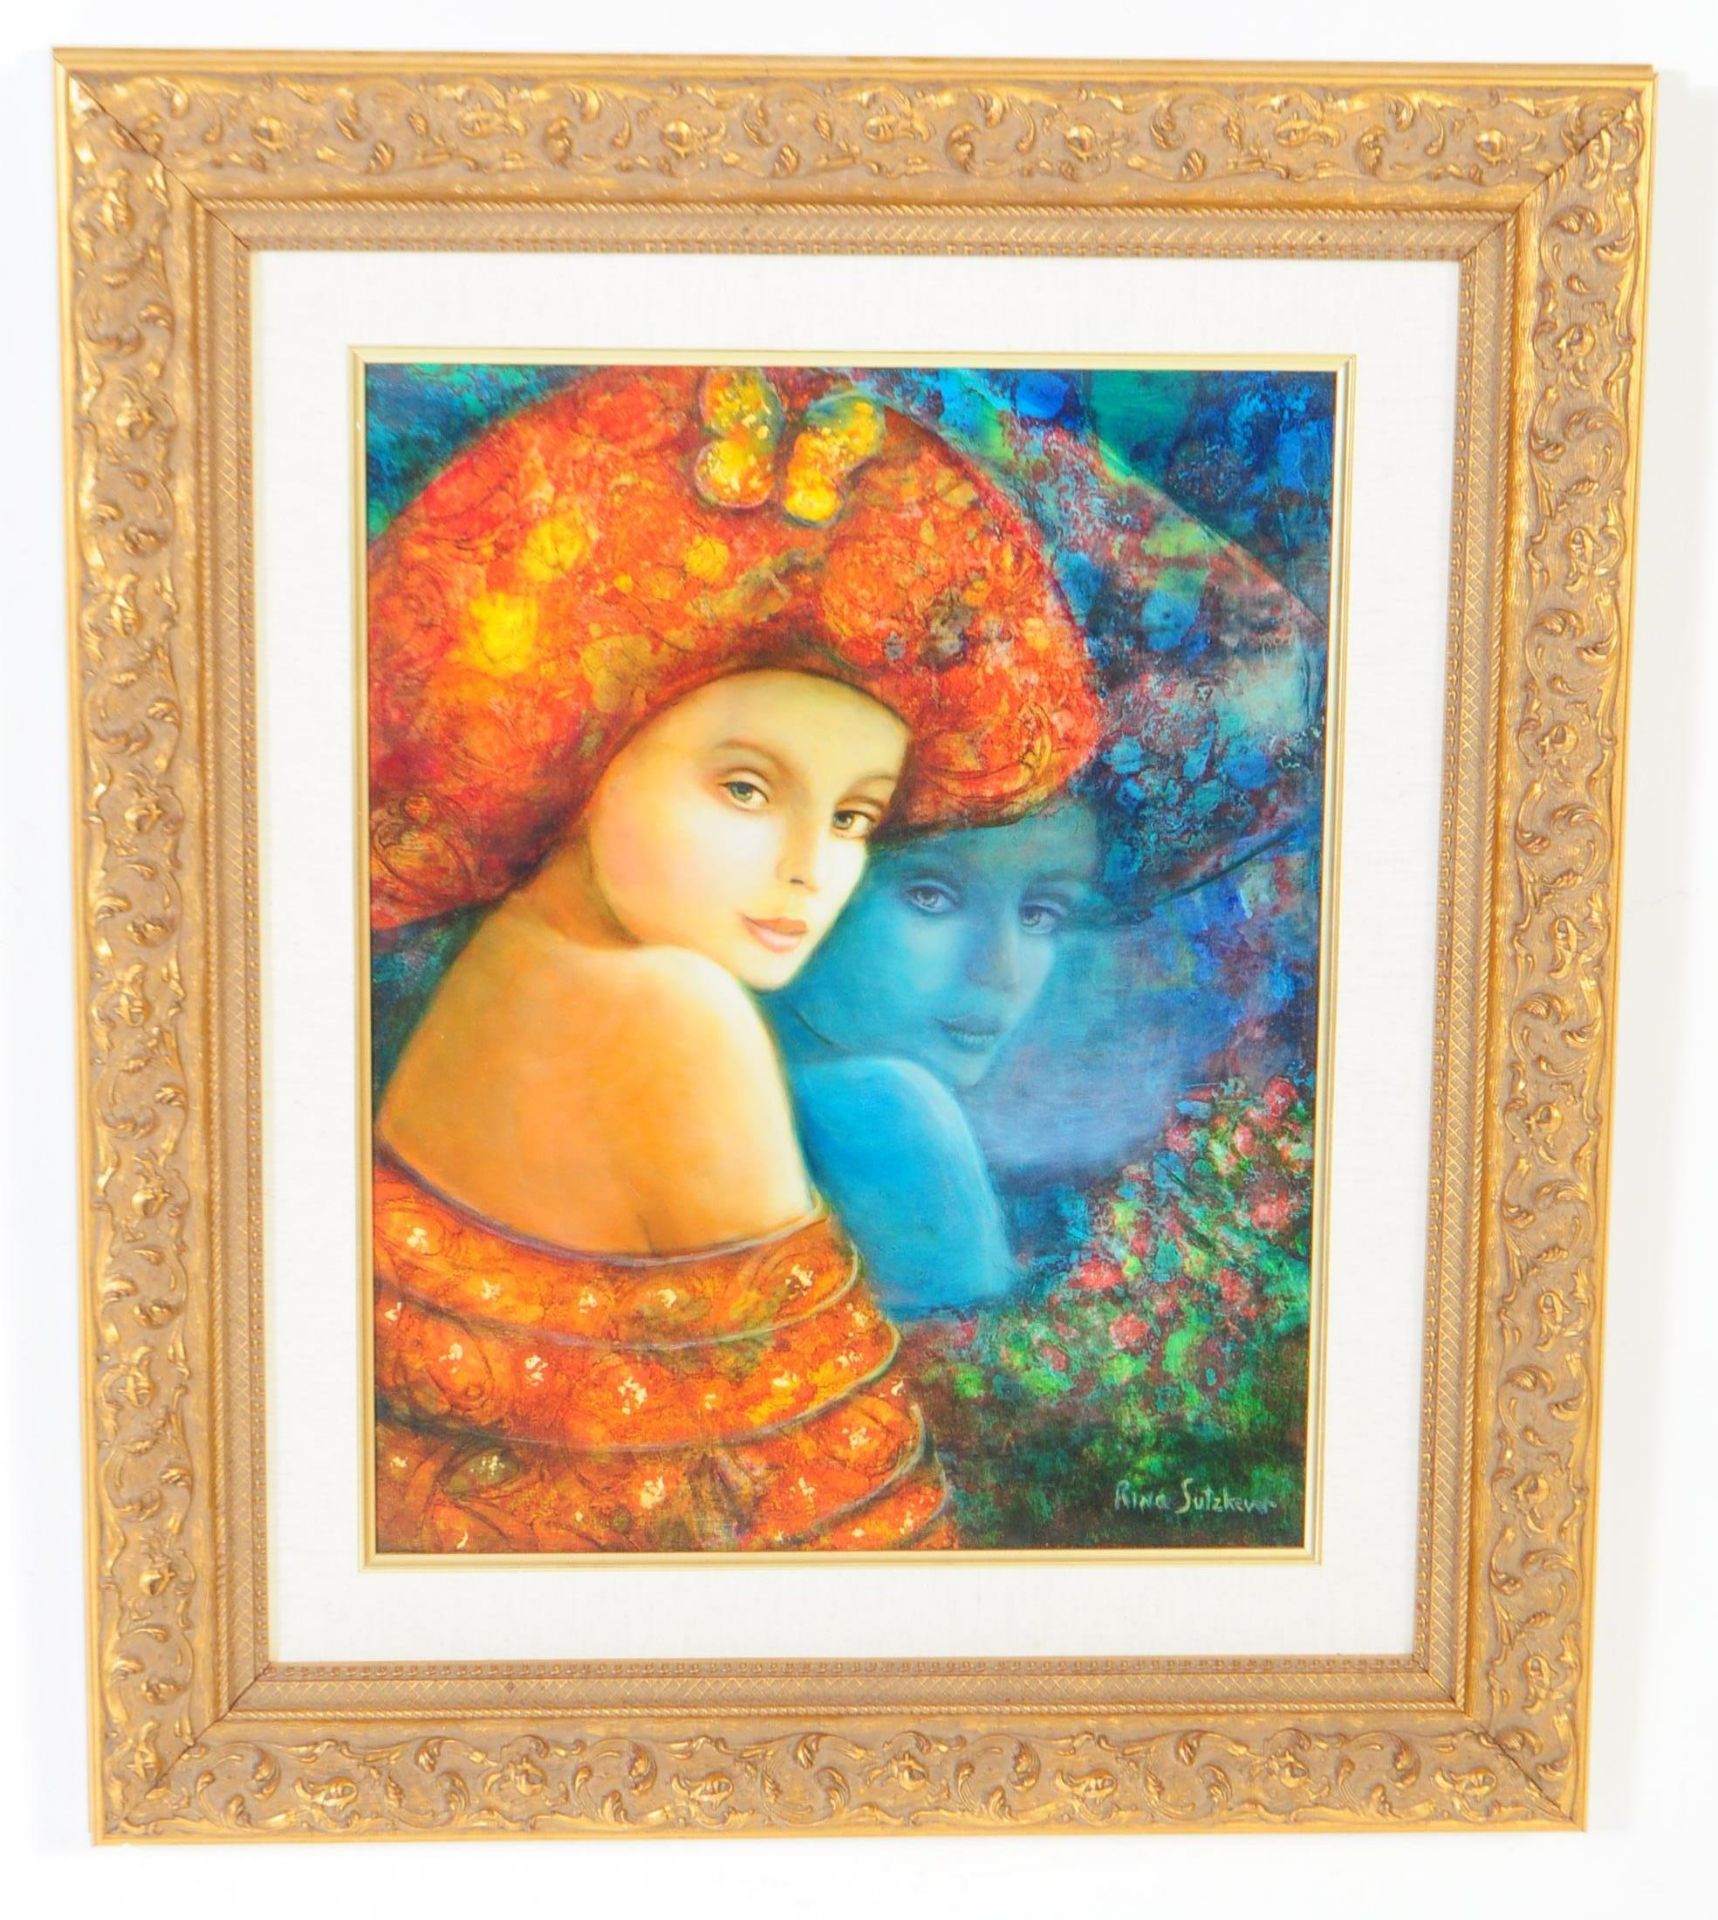 VINTAGE 20TH CENTURY RINA SUTZKEVER OIL ON BOARD PAINTING